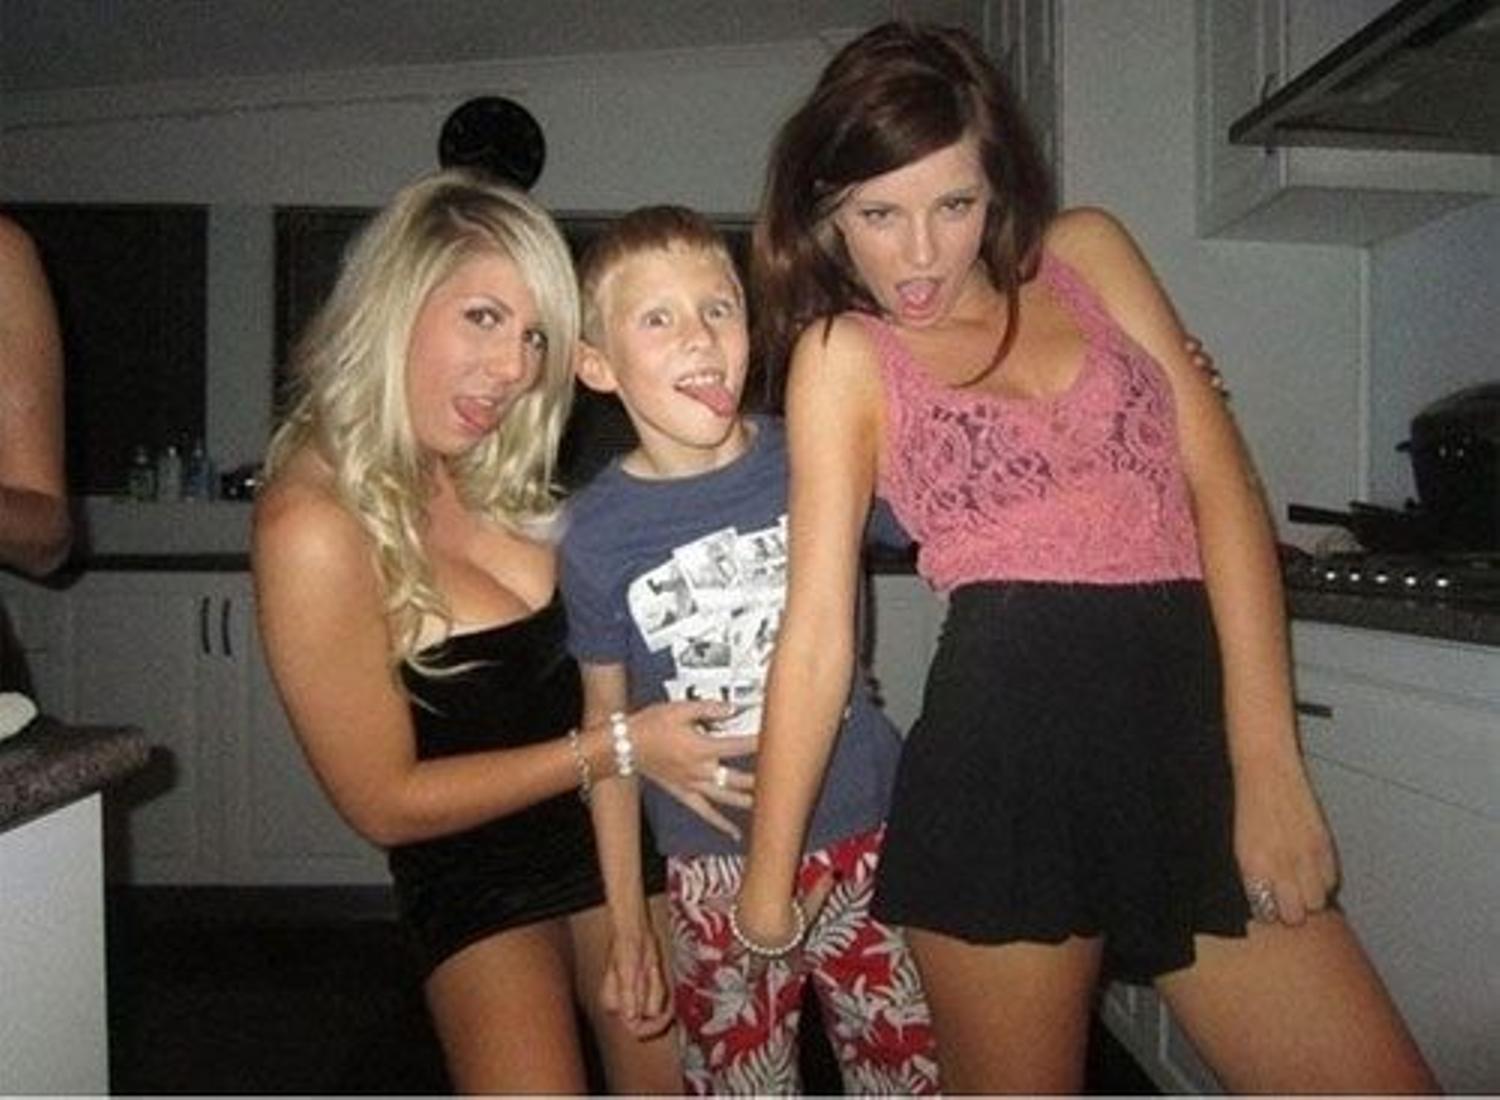 This kid is more of a womanizer at 7 than I'll ever be